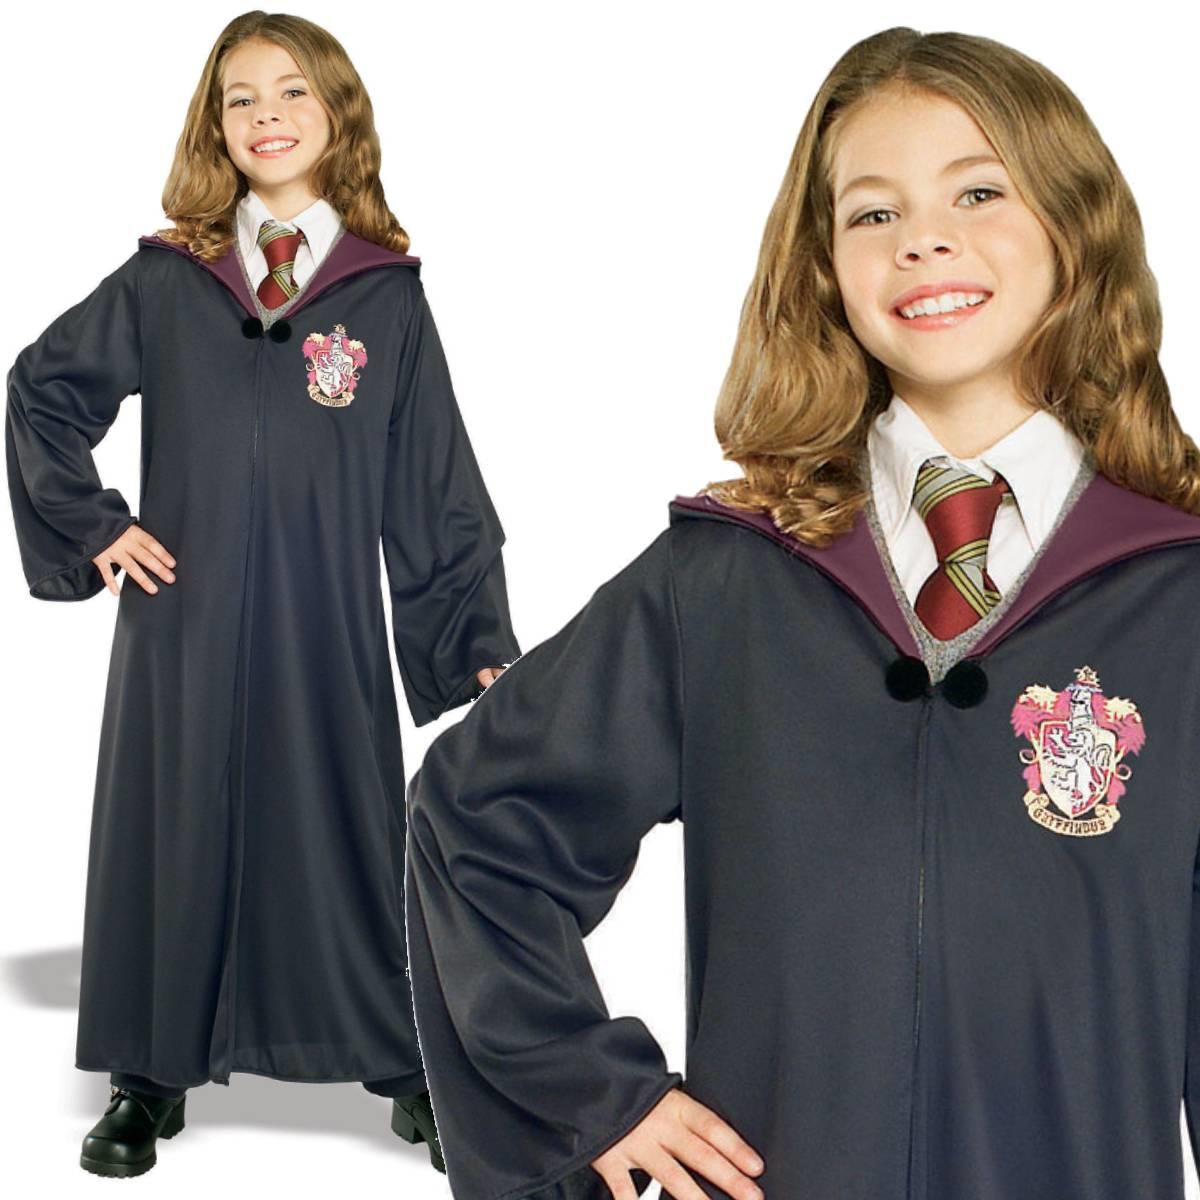 Unisex Harry Potter Gryffindor House Robes for children by Rubies Masquerade 884253 in size small from Karnival Costumes online party shop